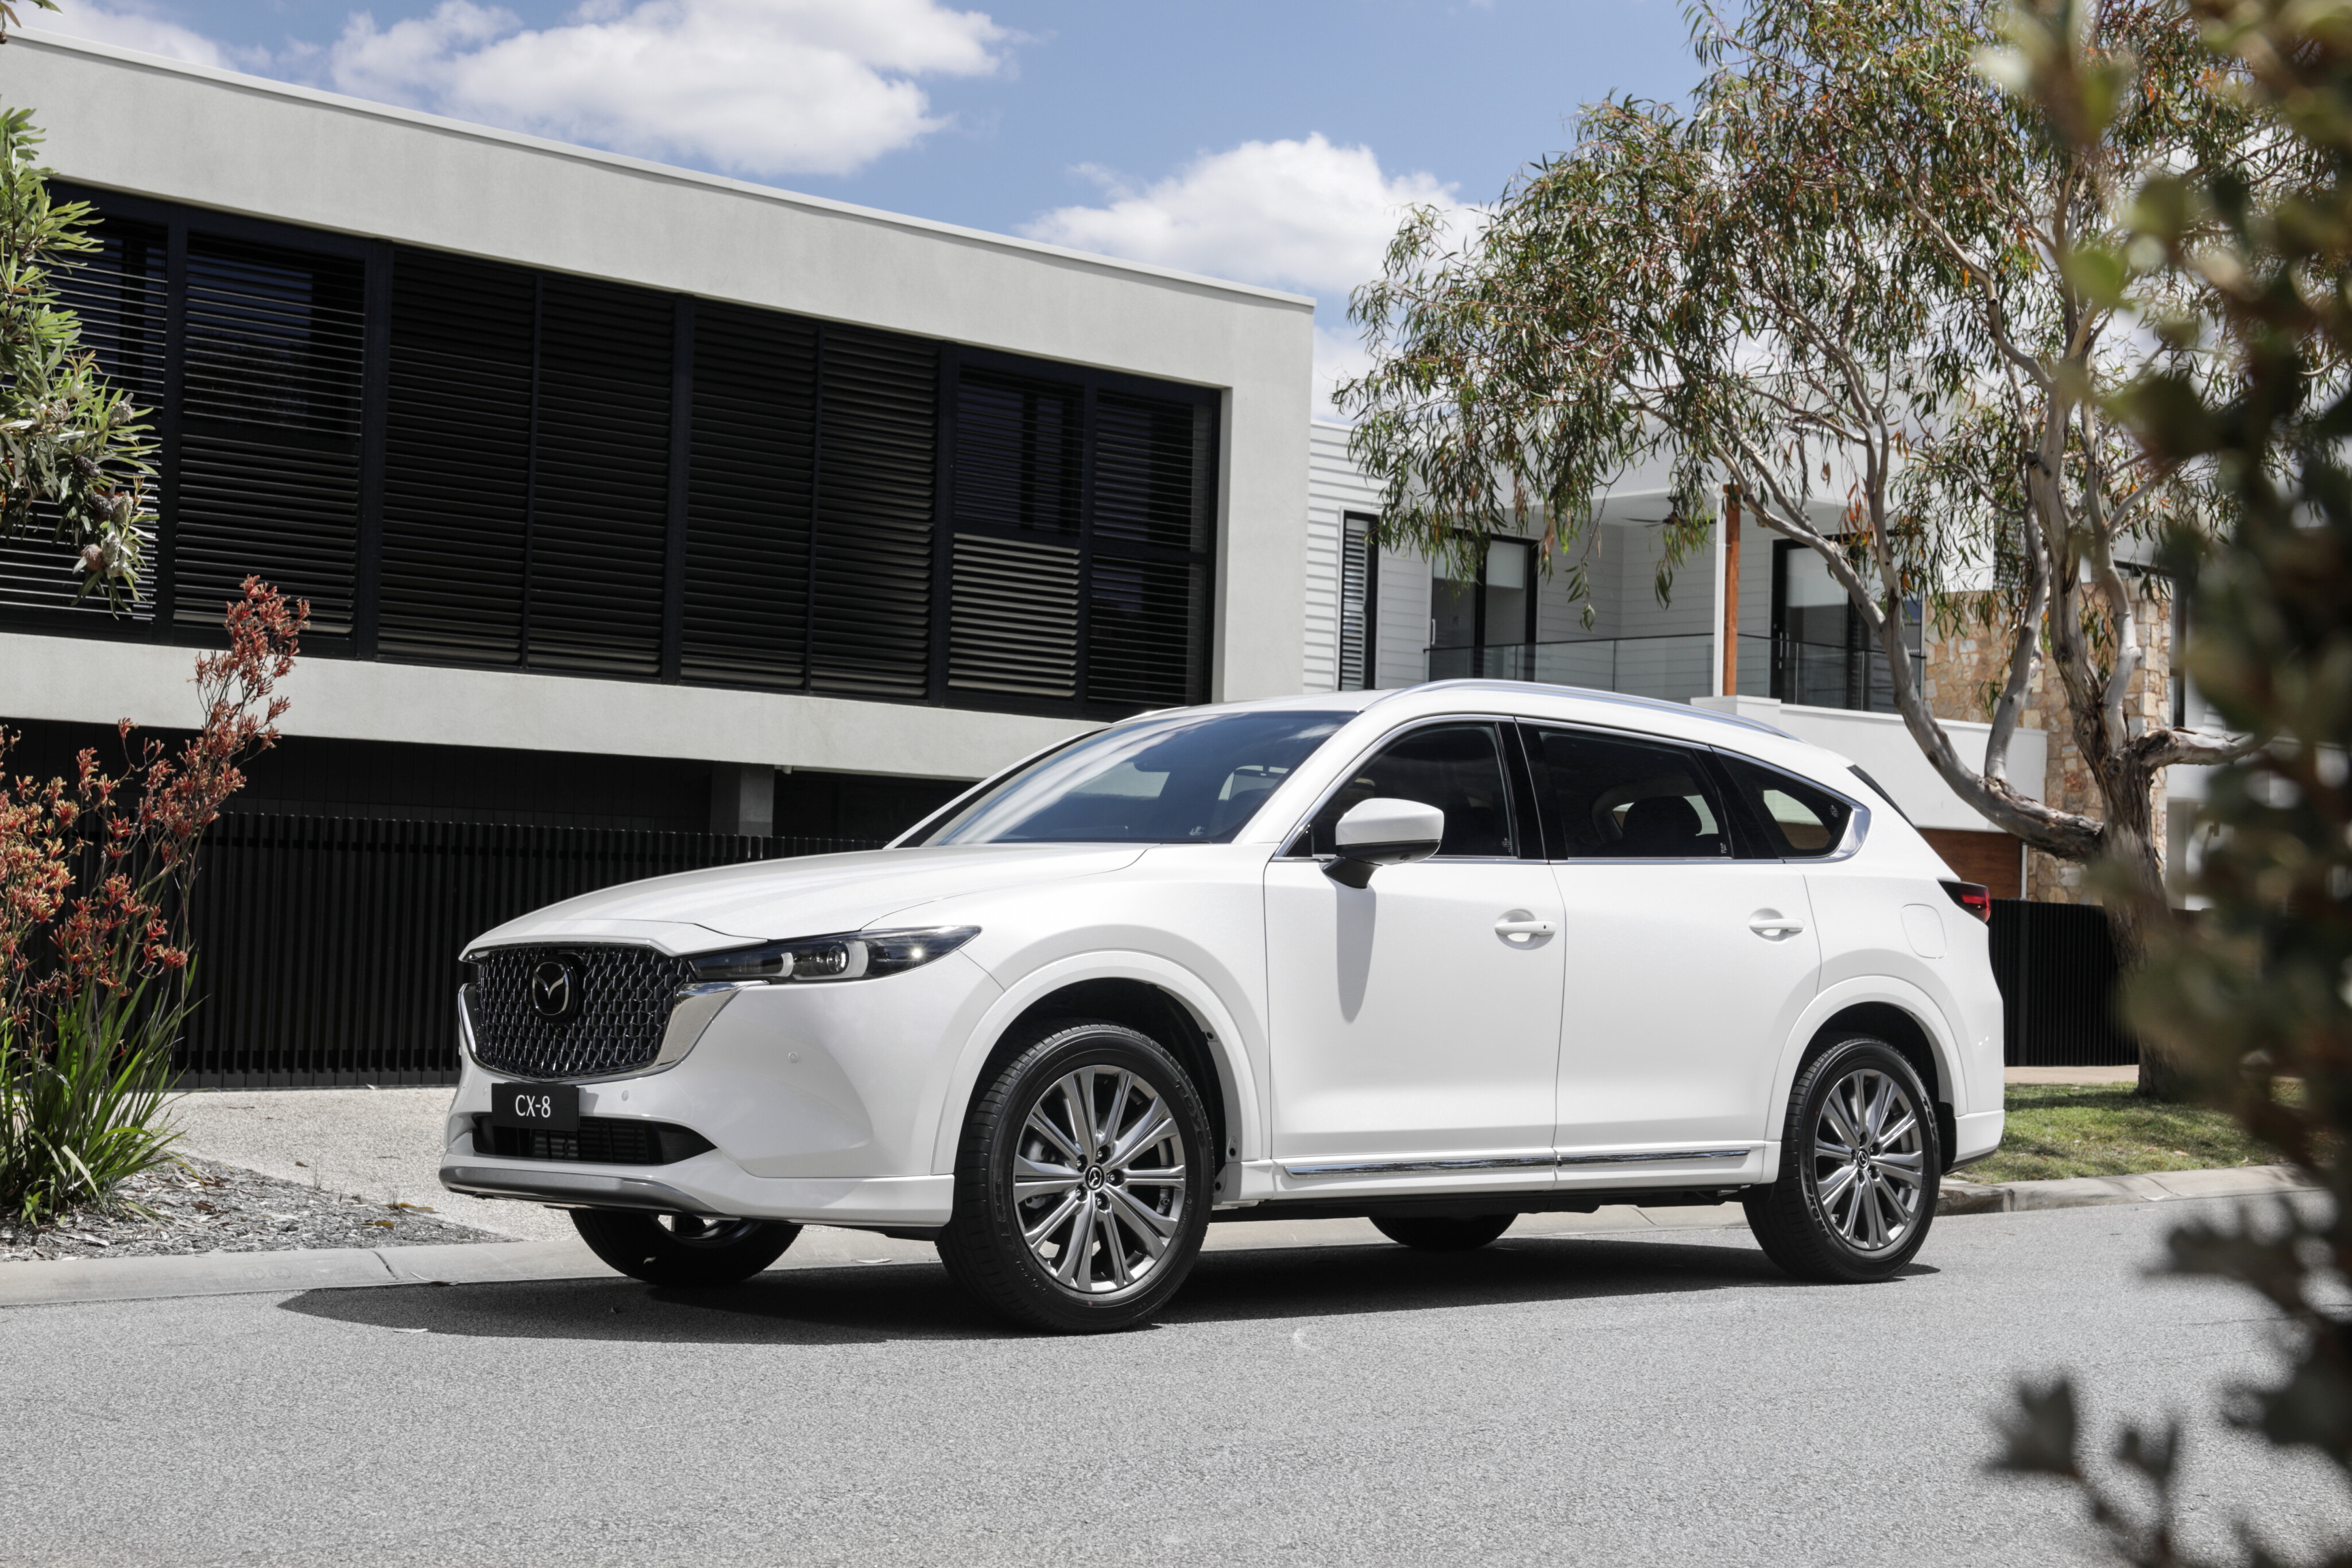 2023 Mazda CX-8 pricing and features